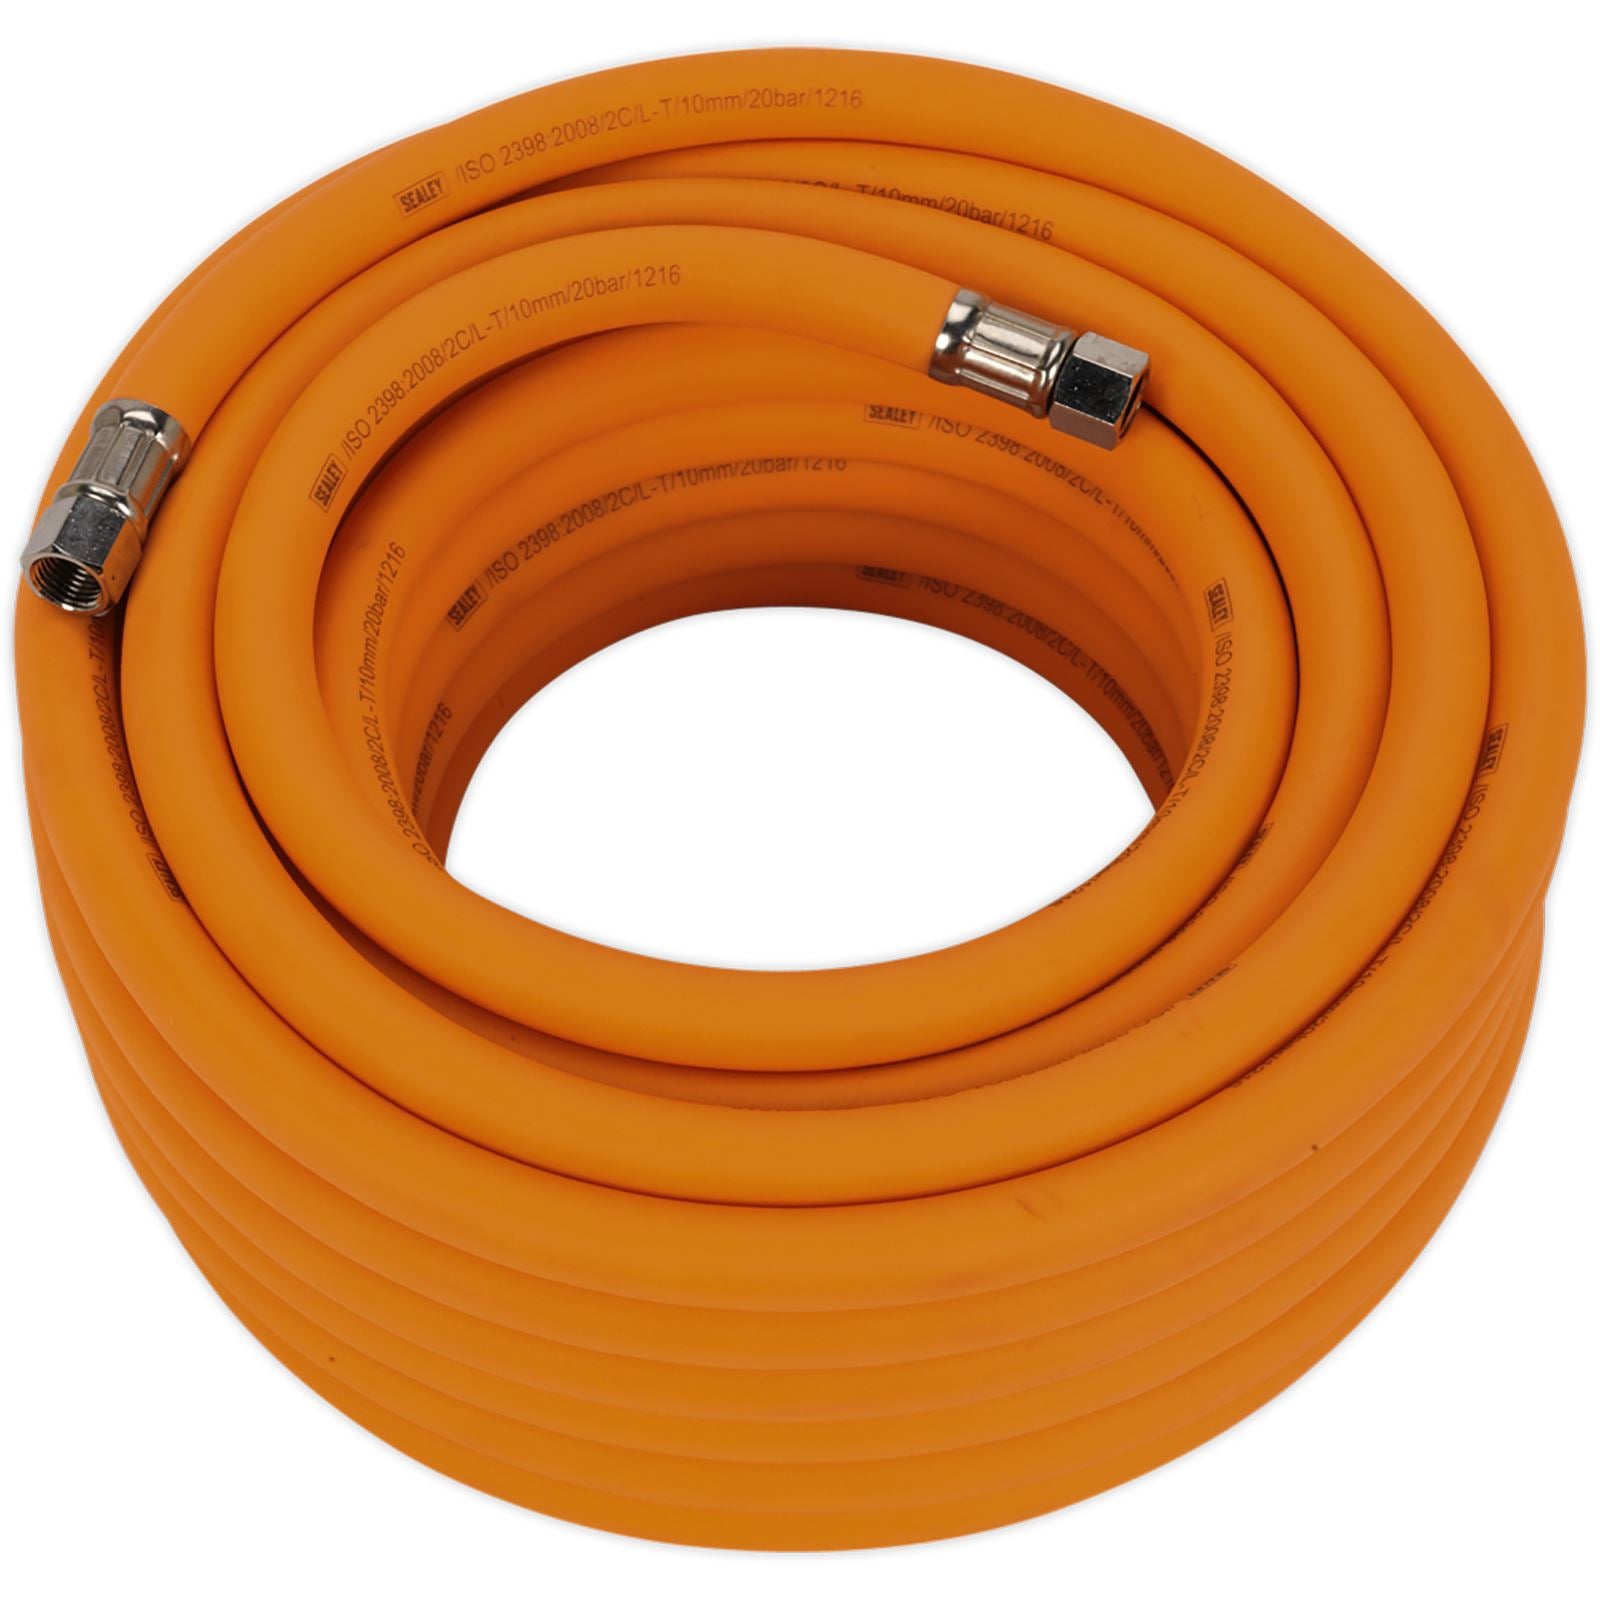 Sealey 15m x Ø10mm Hybrid High Visibility Air Hose with 1/4" BSP Unions